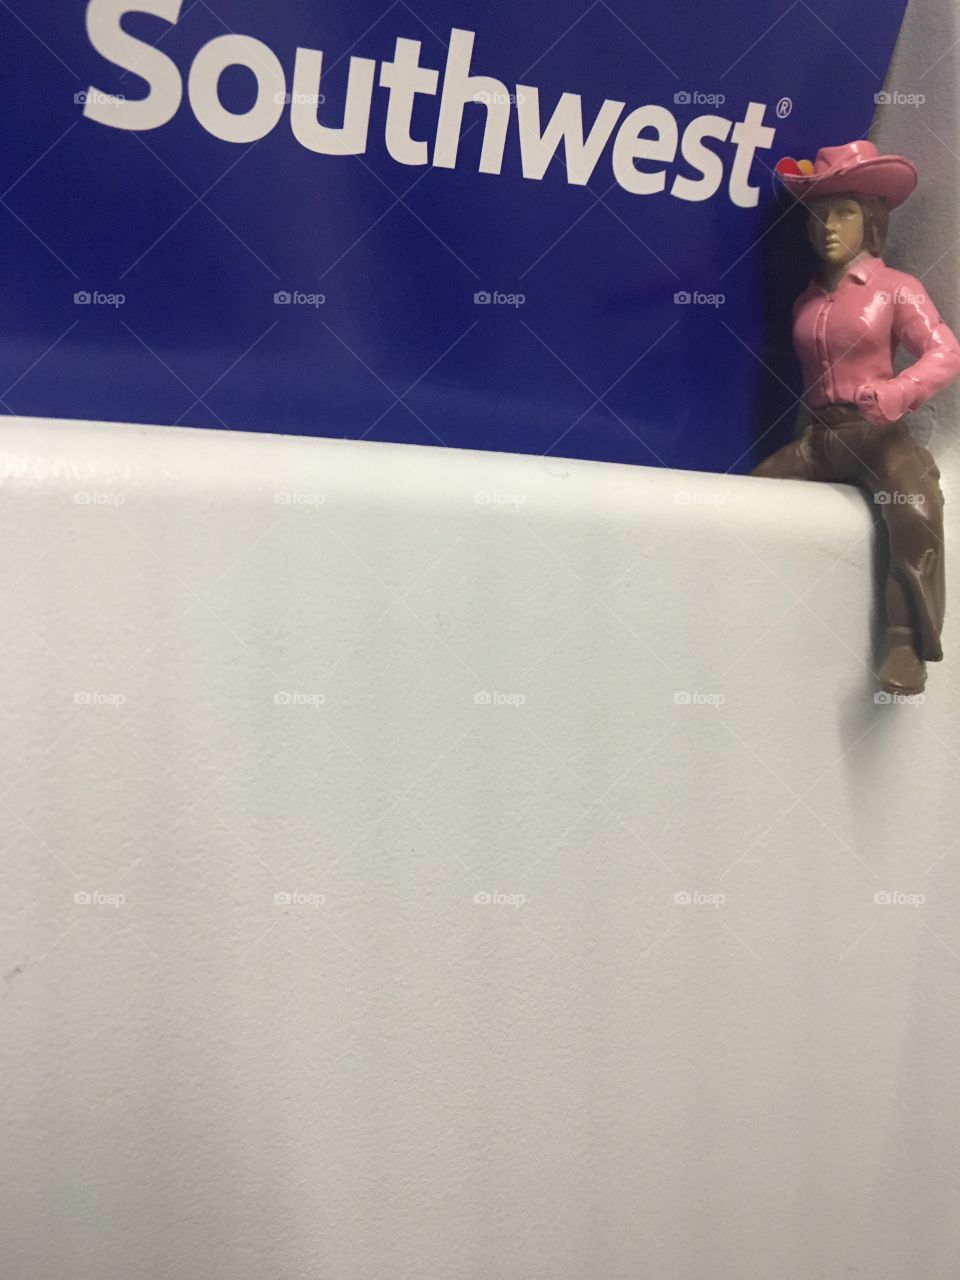 Southwest: The Airline for Cowgirls 